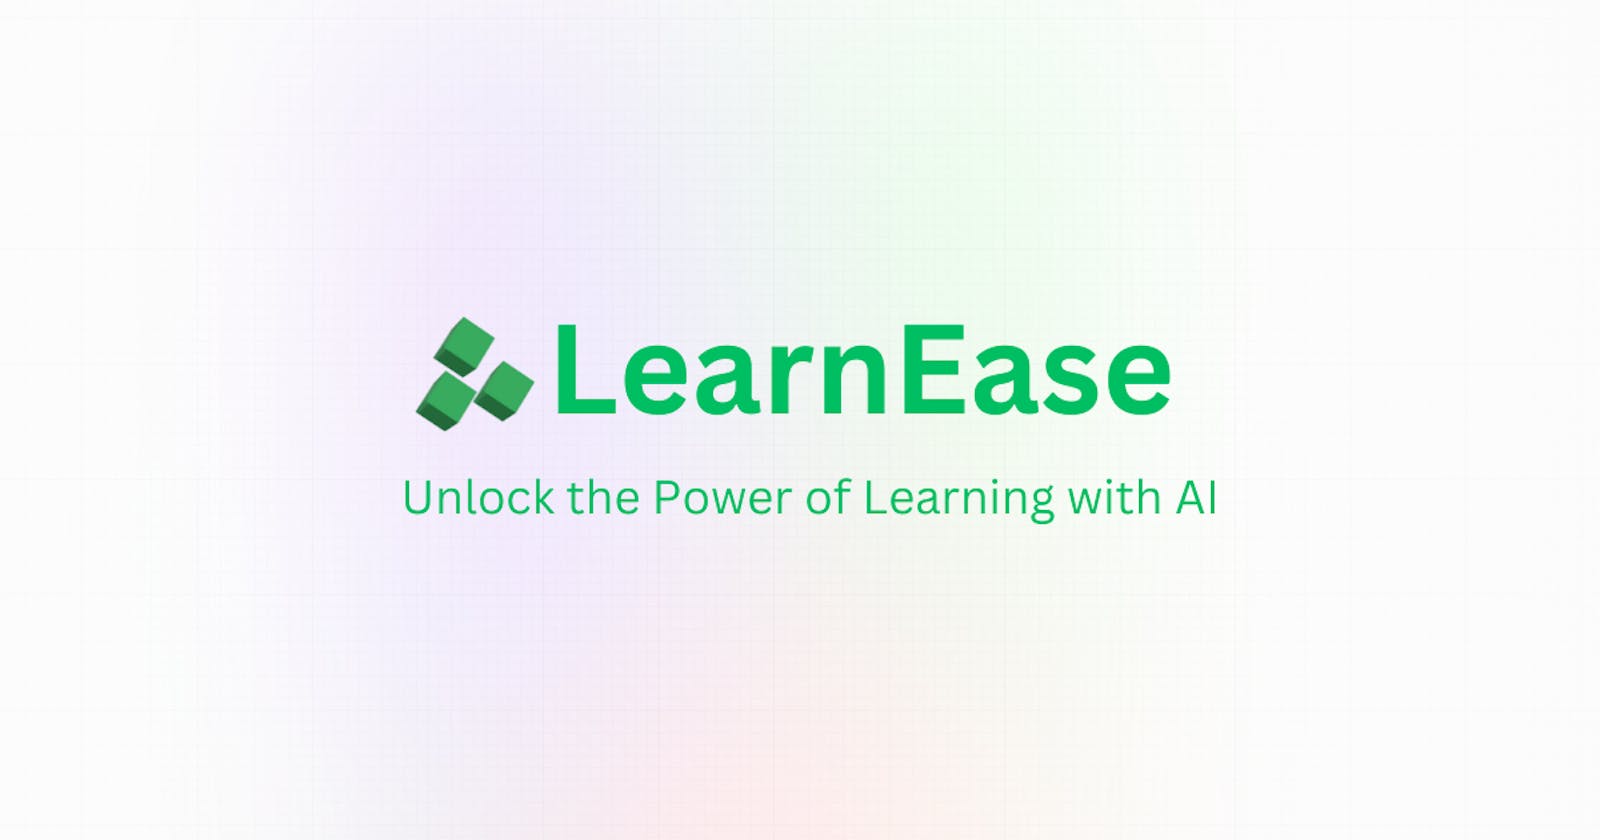 Introducing LearnEase - an AI Learning Platform for Everyone